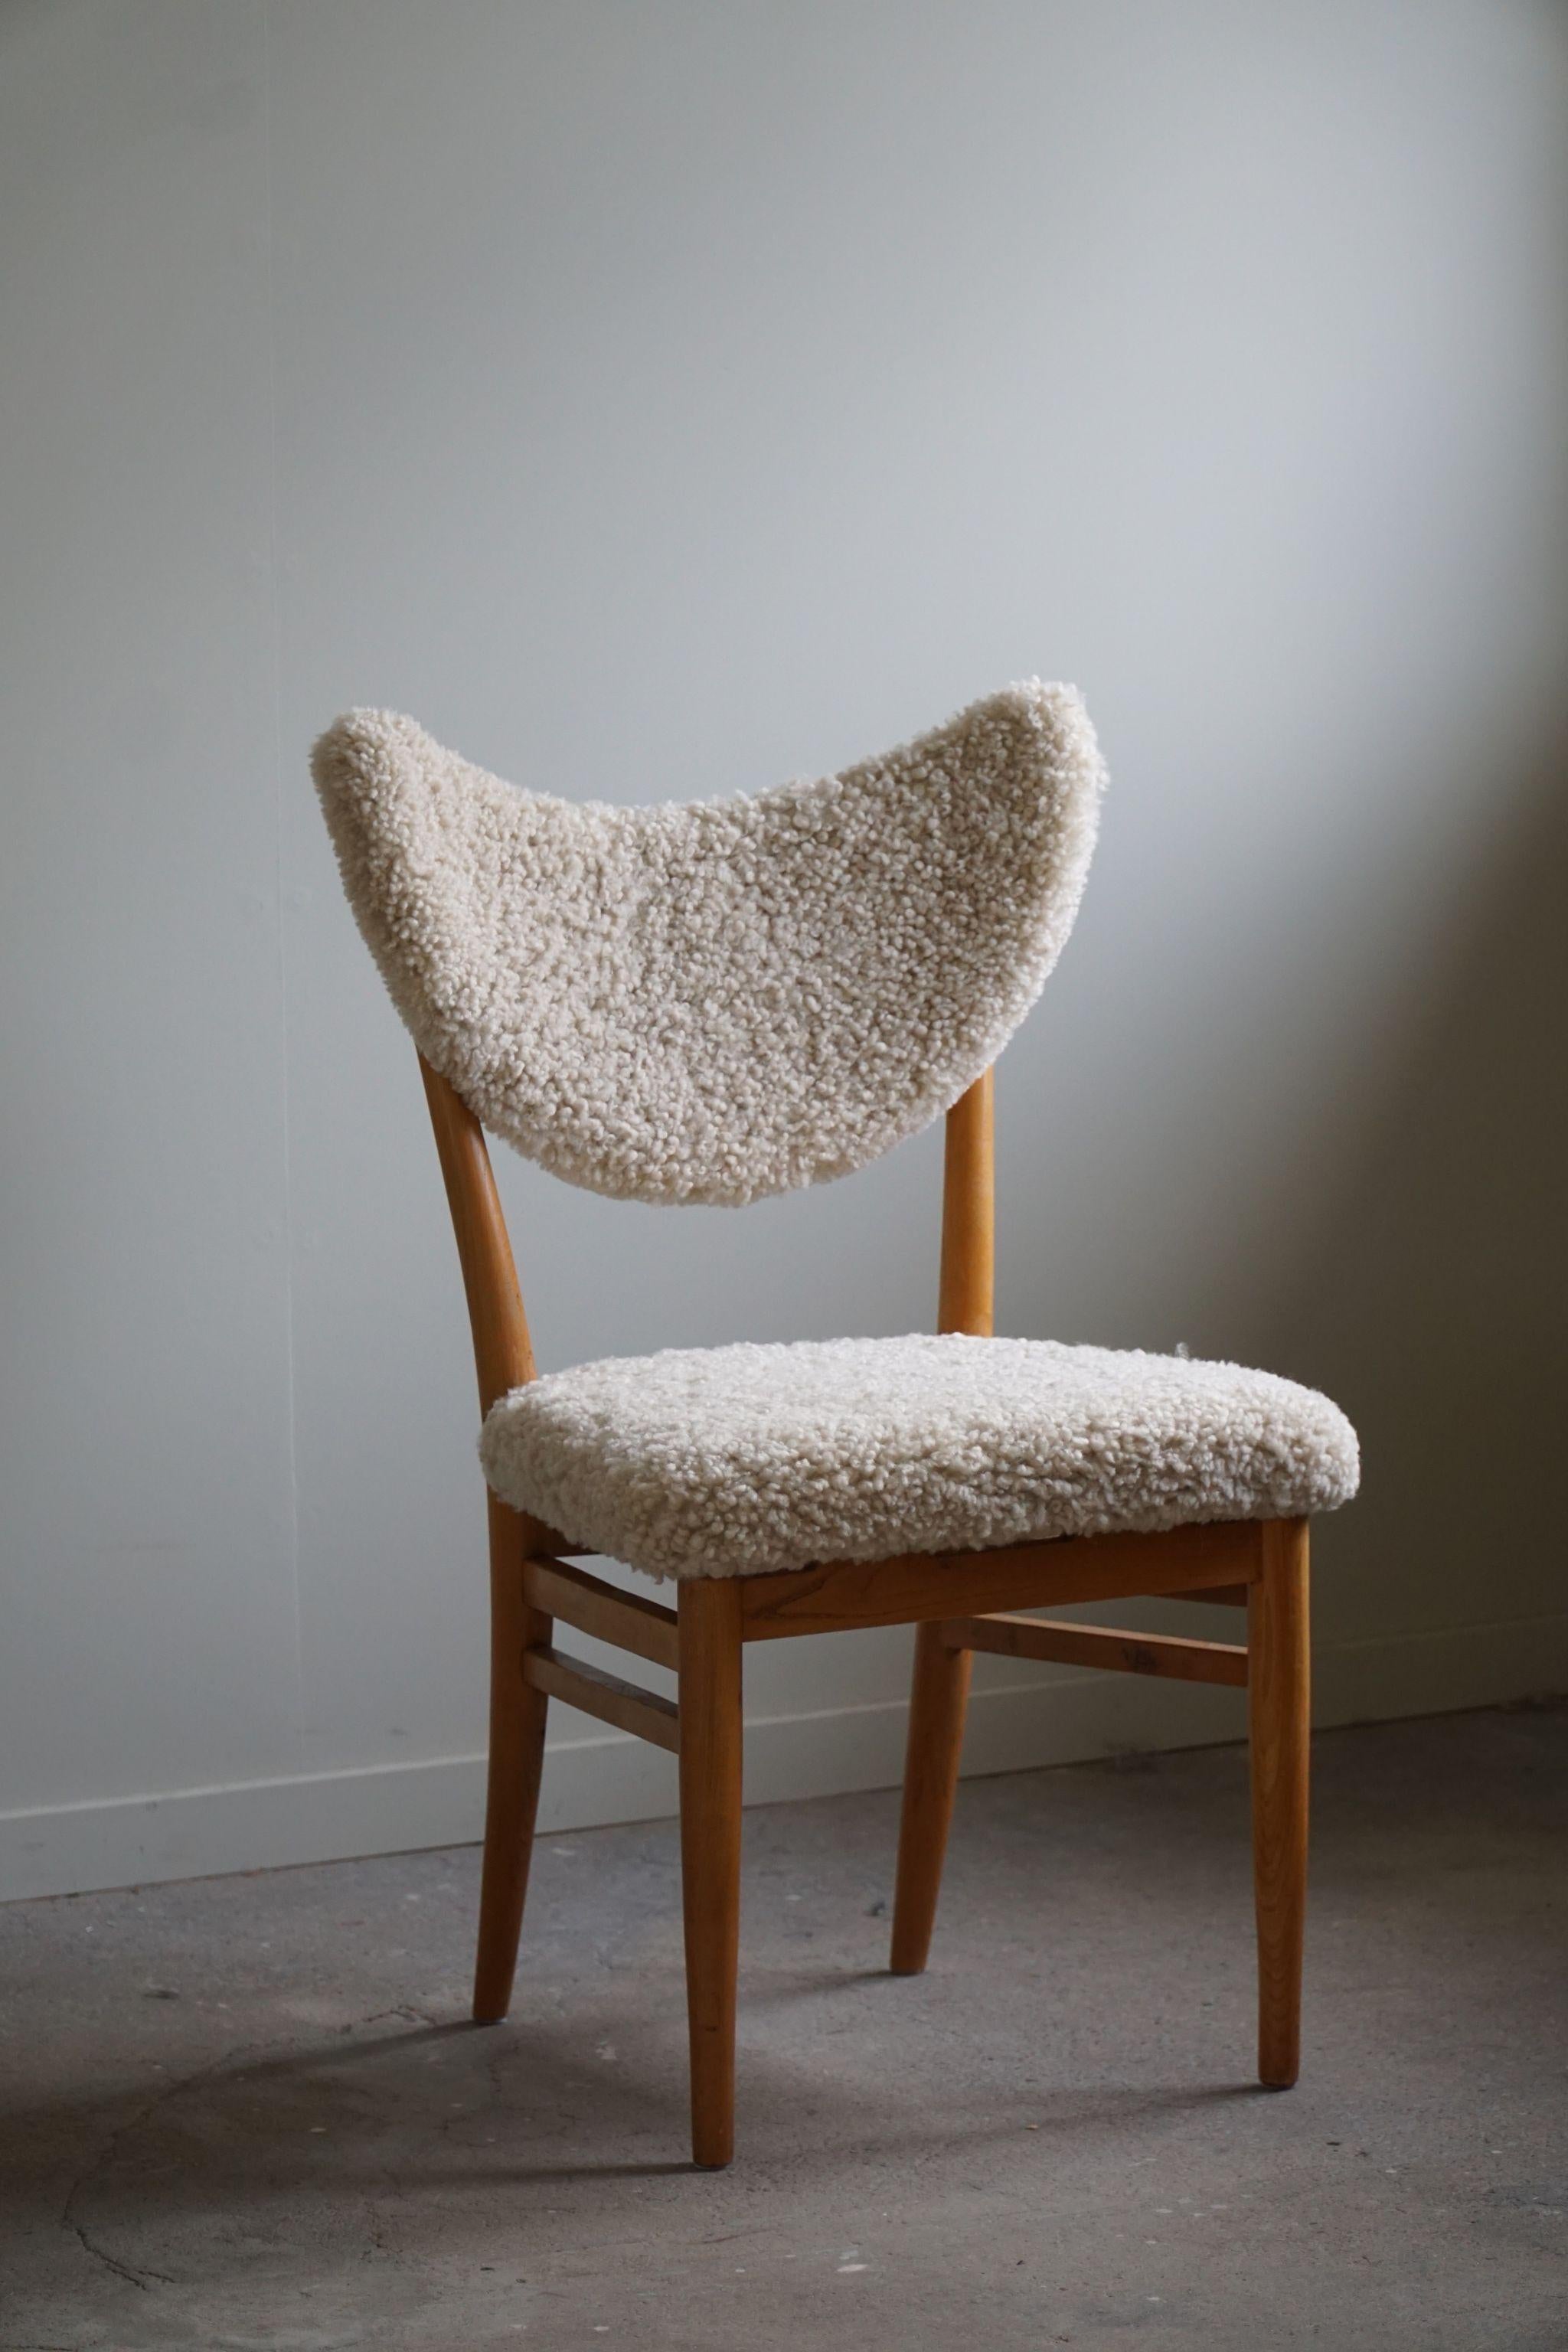 Hvidt & Mølgaard, Set of 4 Chairs in Ash, Reupholstered in Lambswool, 1950s For Sale 9